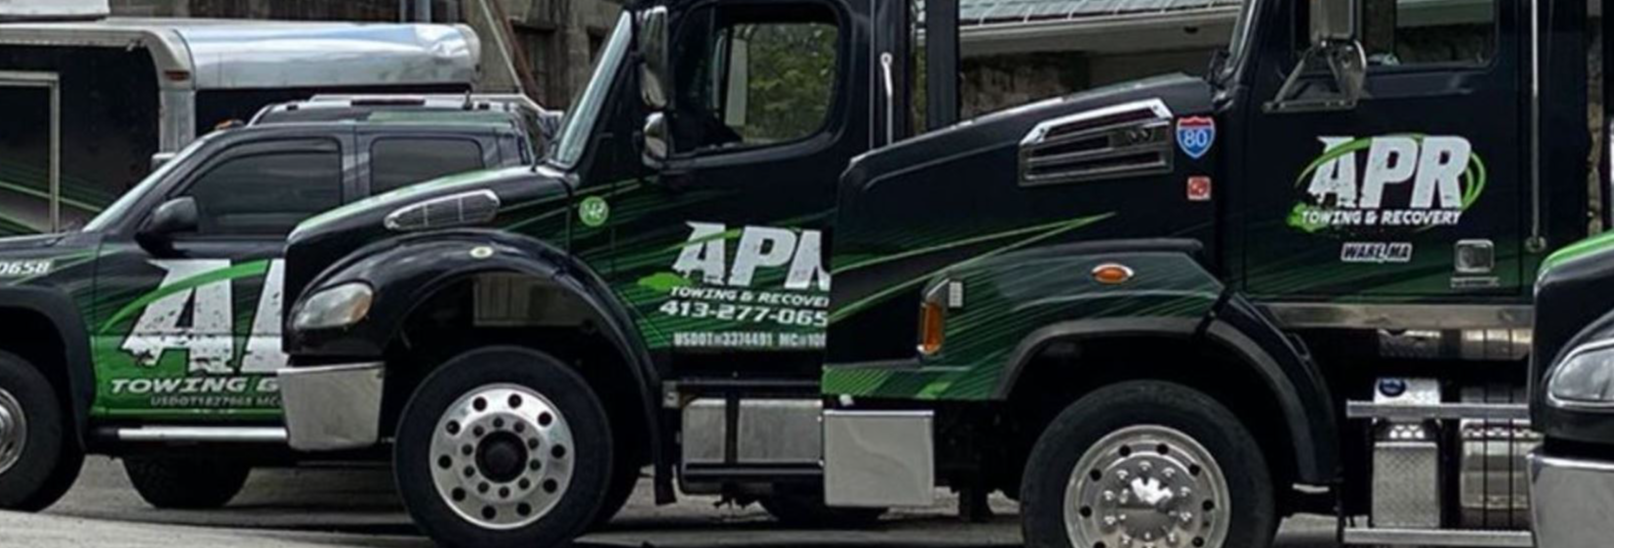 APR Towing & Recovery Towing.com Profile Banner